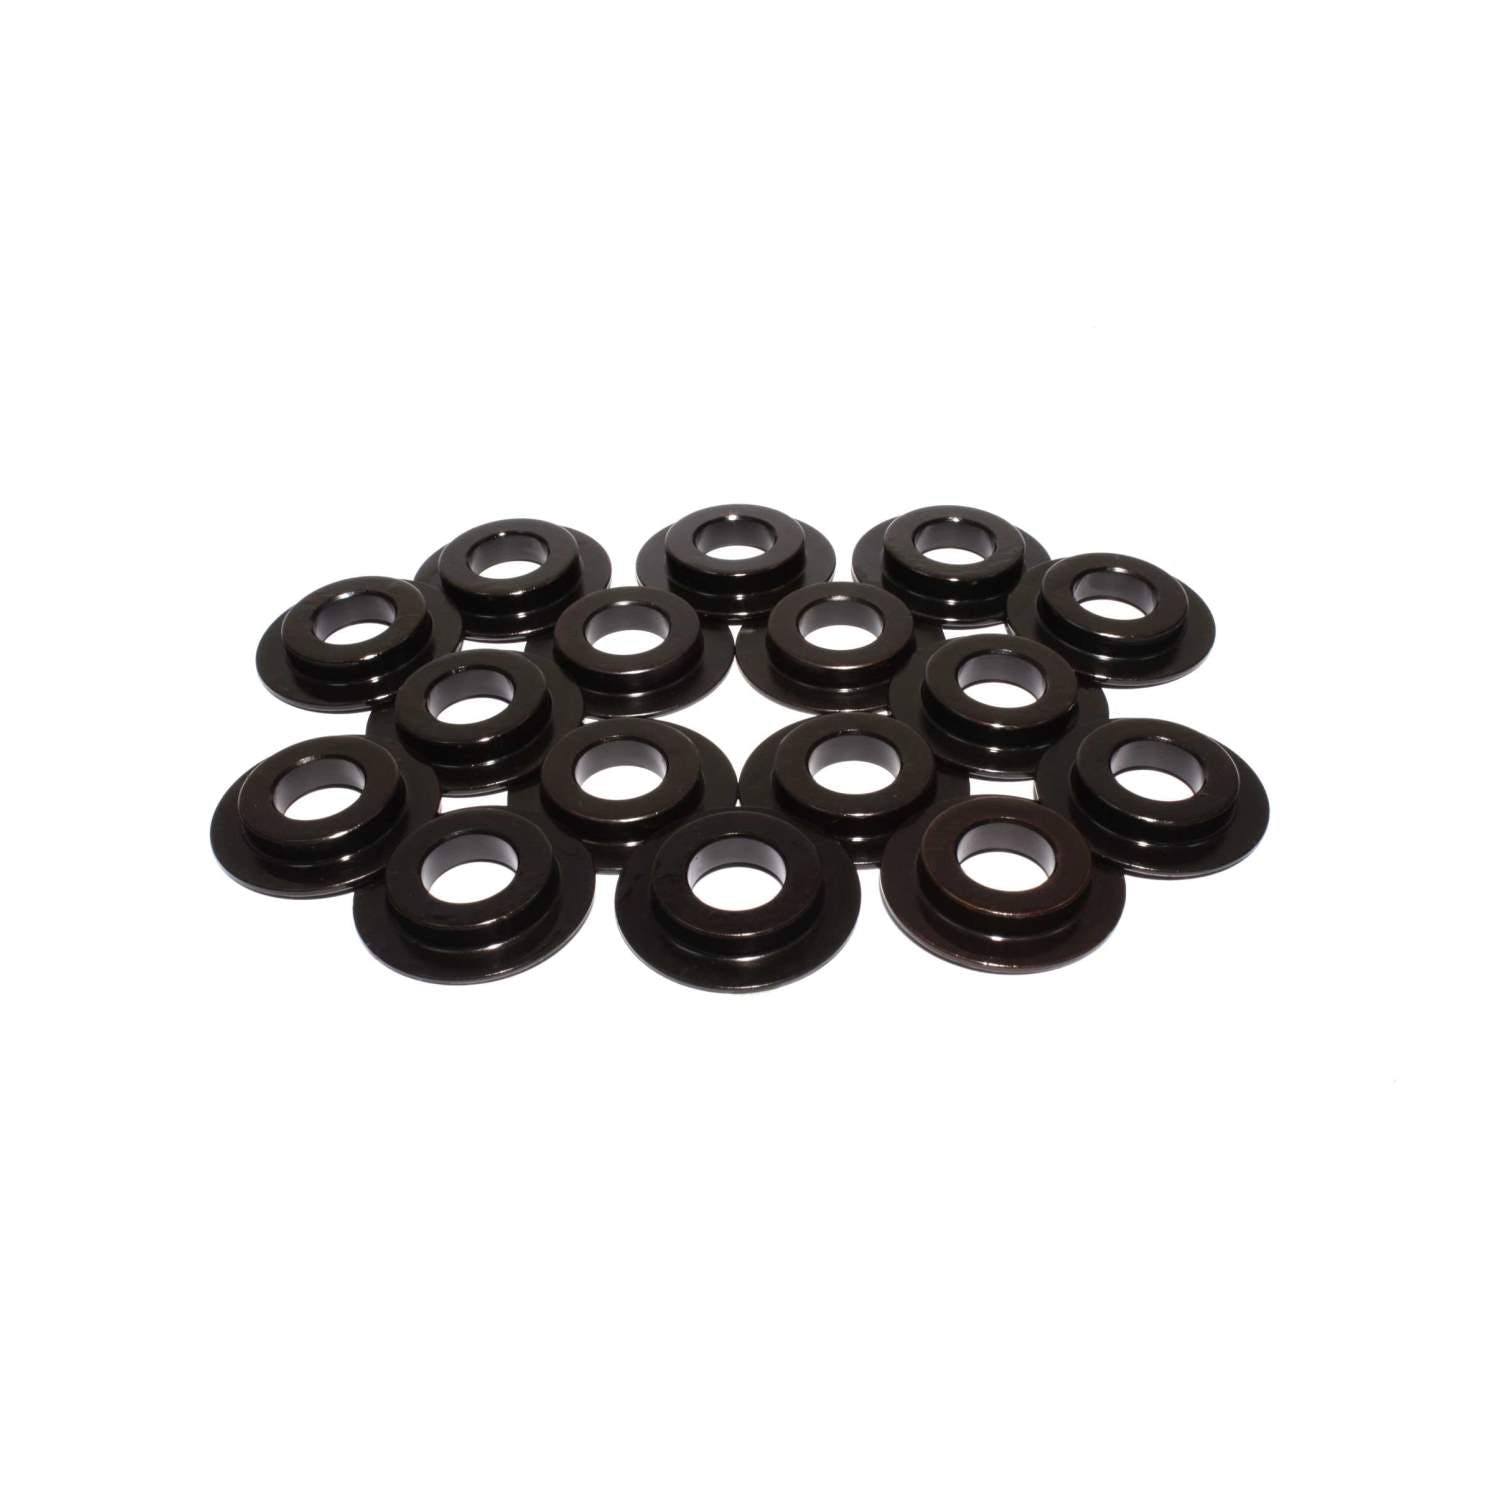 Competition Cams 4685-16 ID Spring Locator Set of 16 - 1.285 inch OD, .532 inch ID, .040 inch Thickness